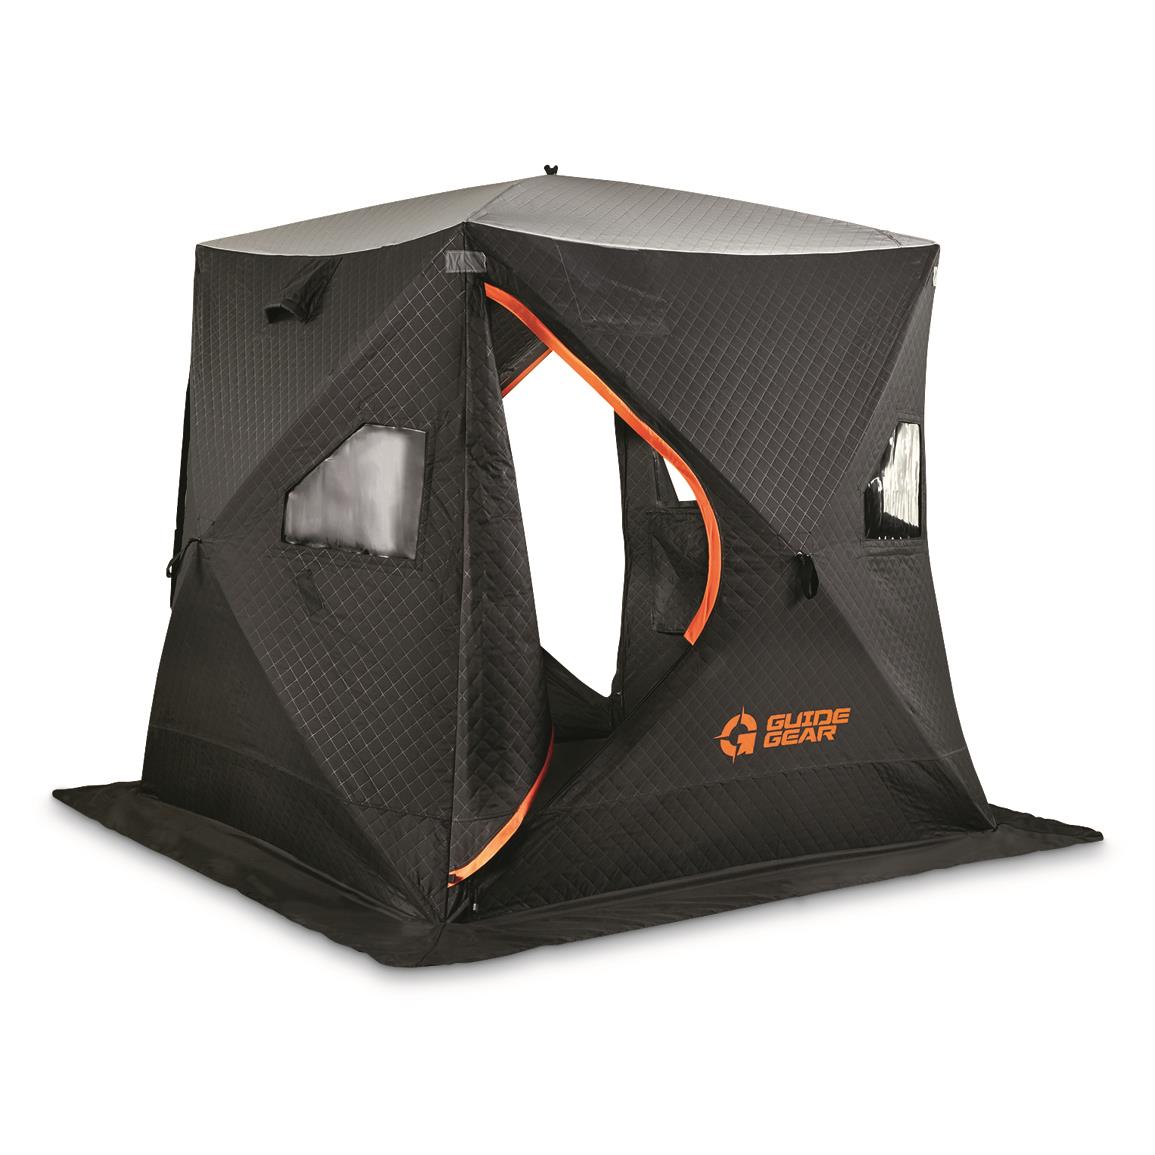 Guide Gear 6' x 6' Fully Insulated Ice Fishing Shelter